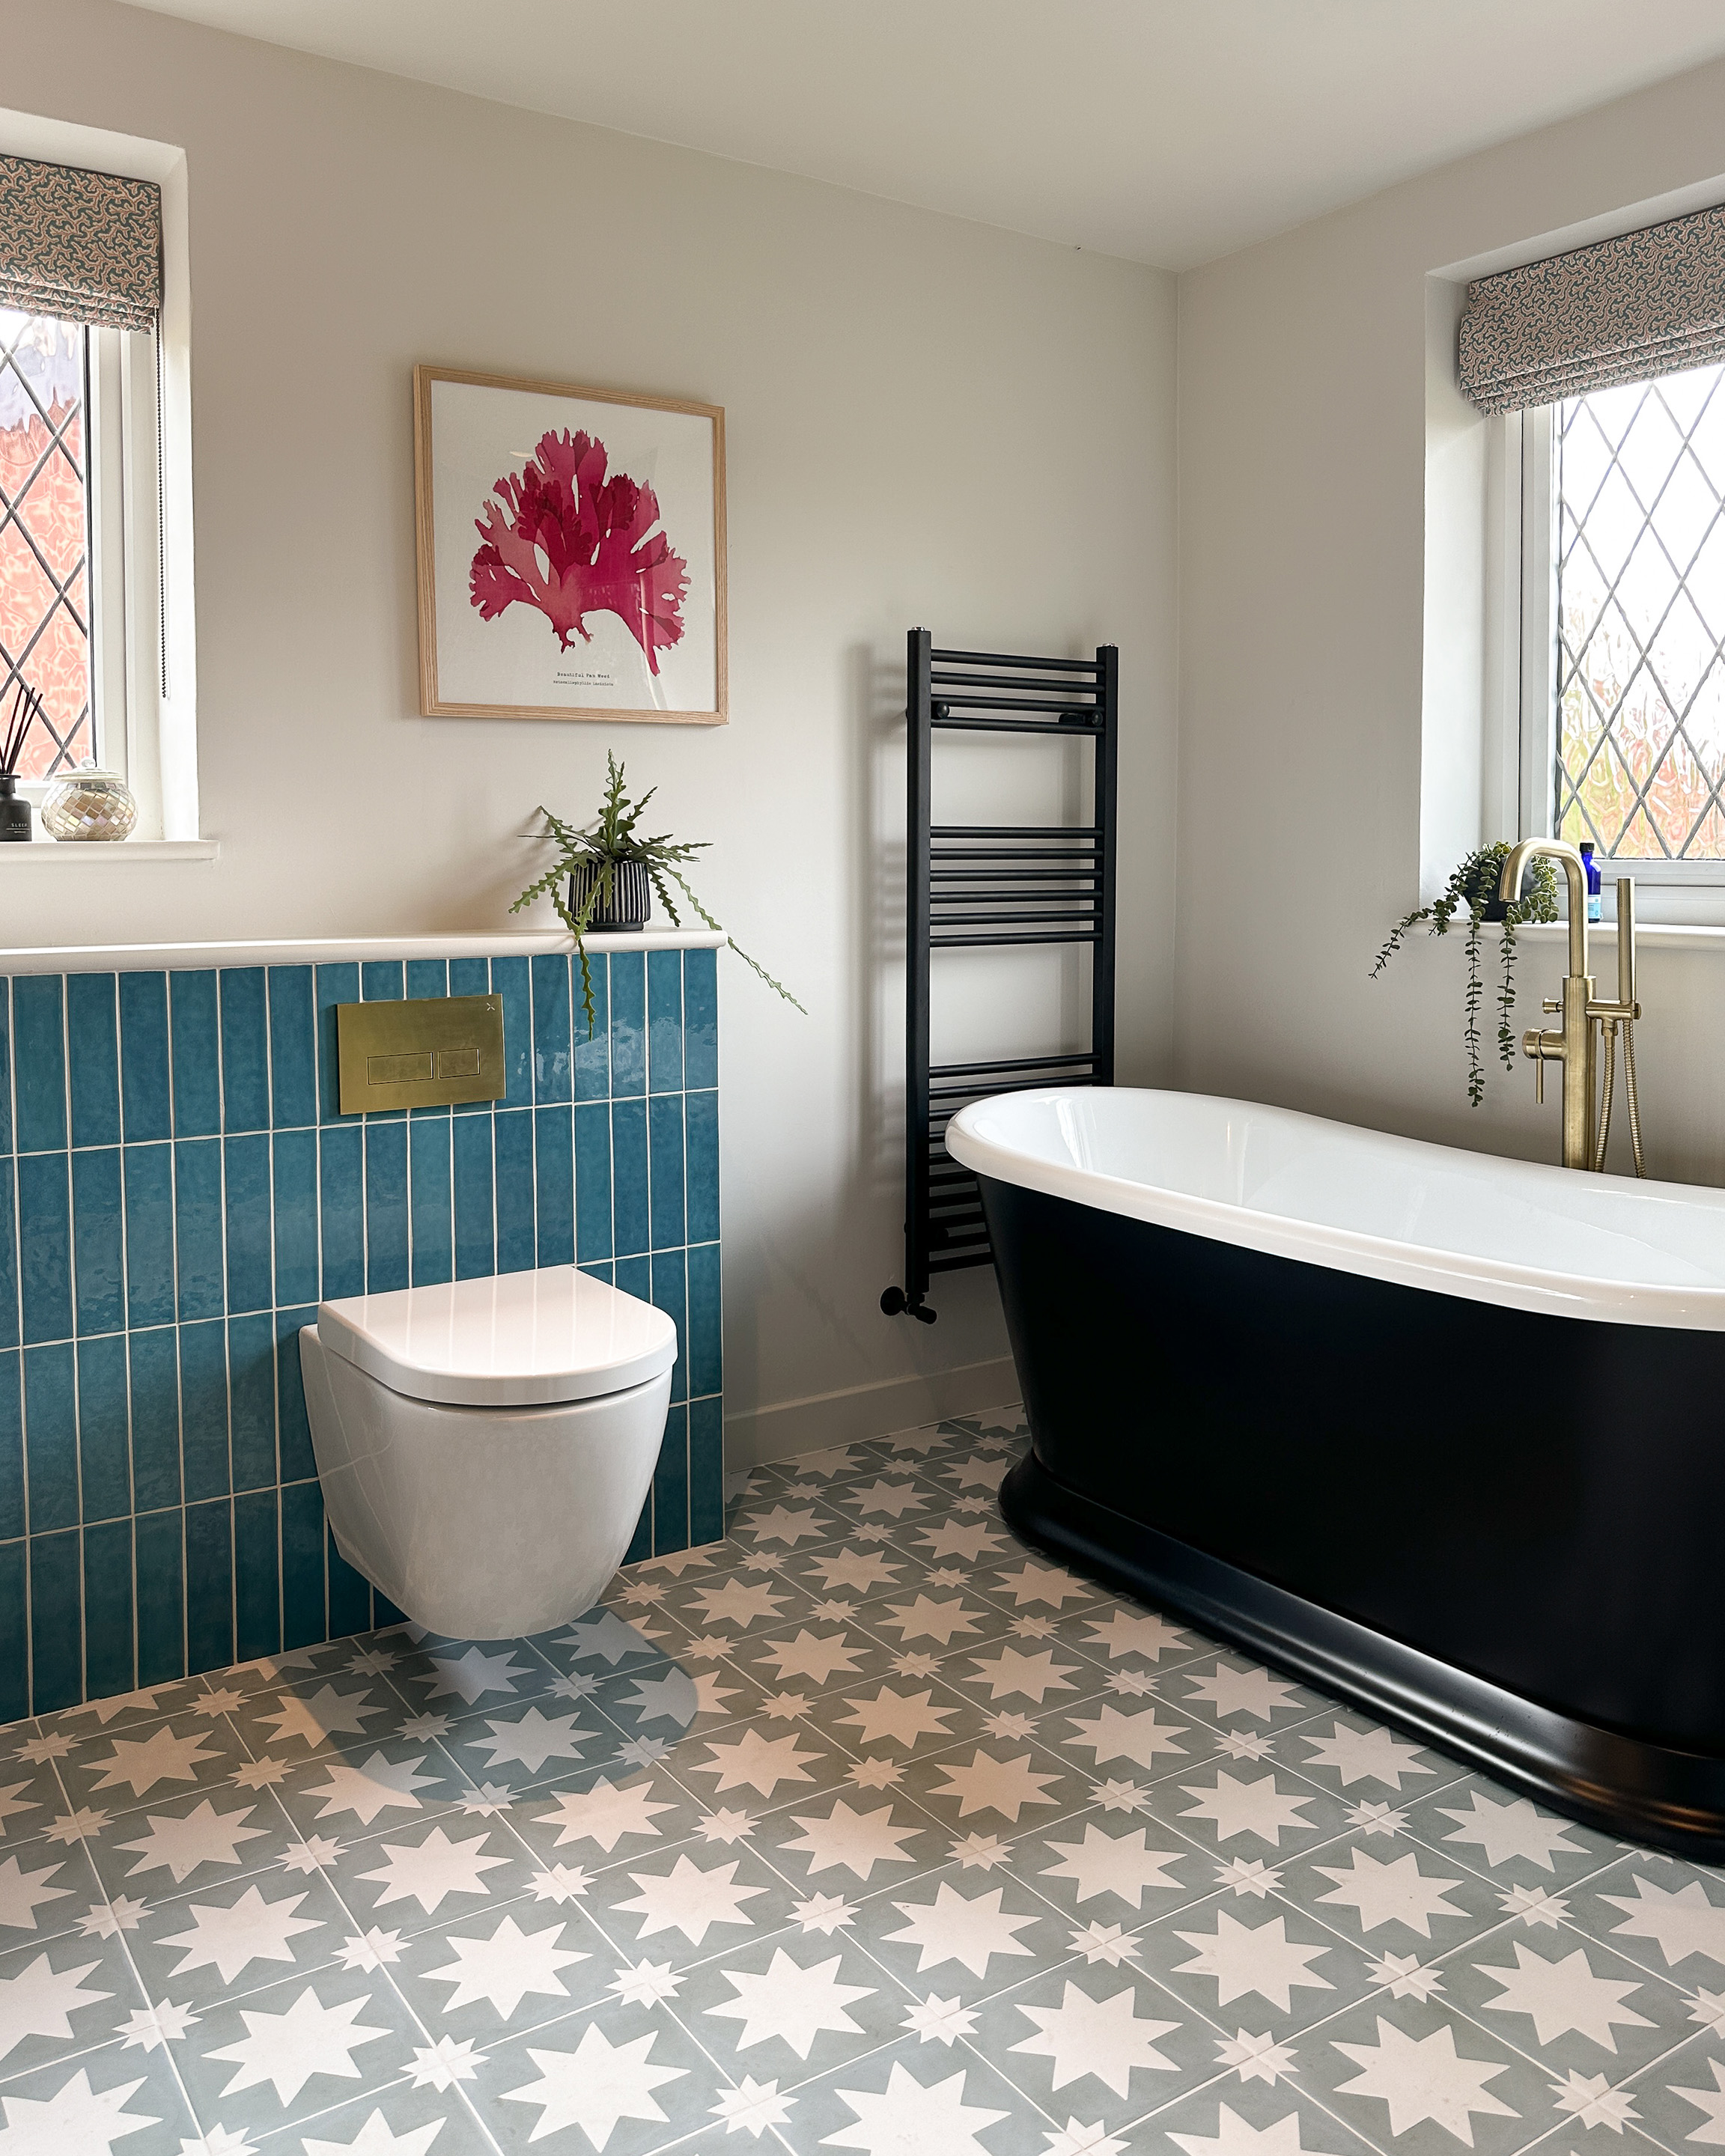 This picture shows a bathroom with a new floating loo against blue tiles. The floor tiles have a bold star pattern, and the bath is a traditional style roll-top bath in black.